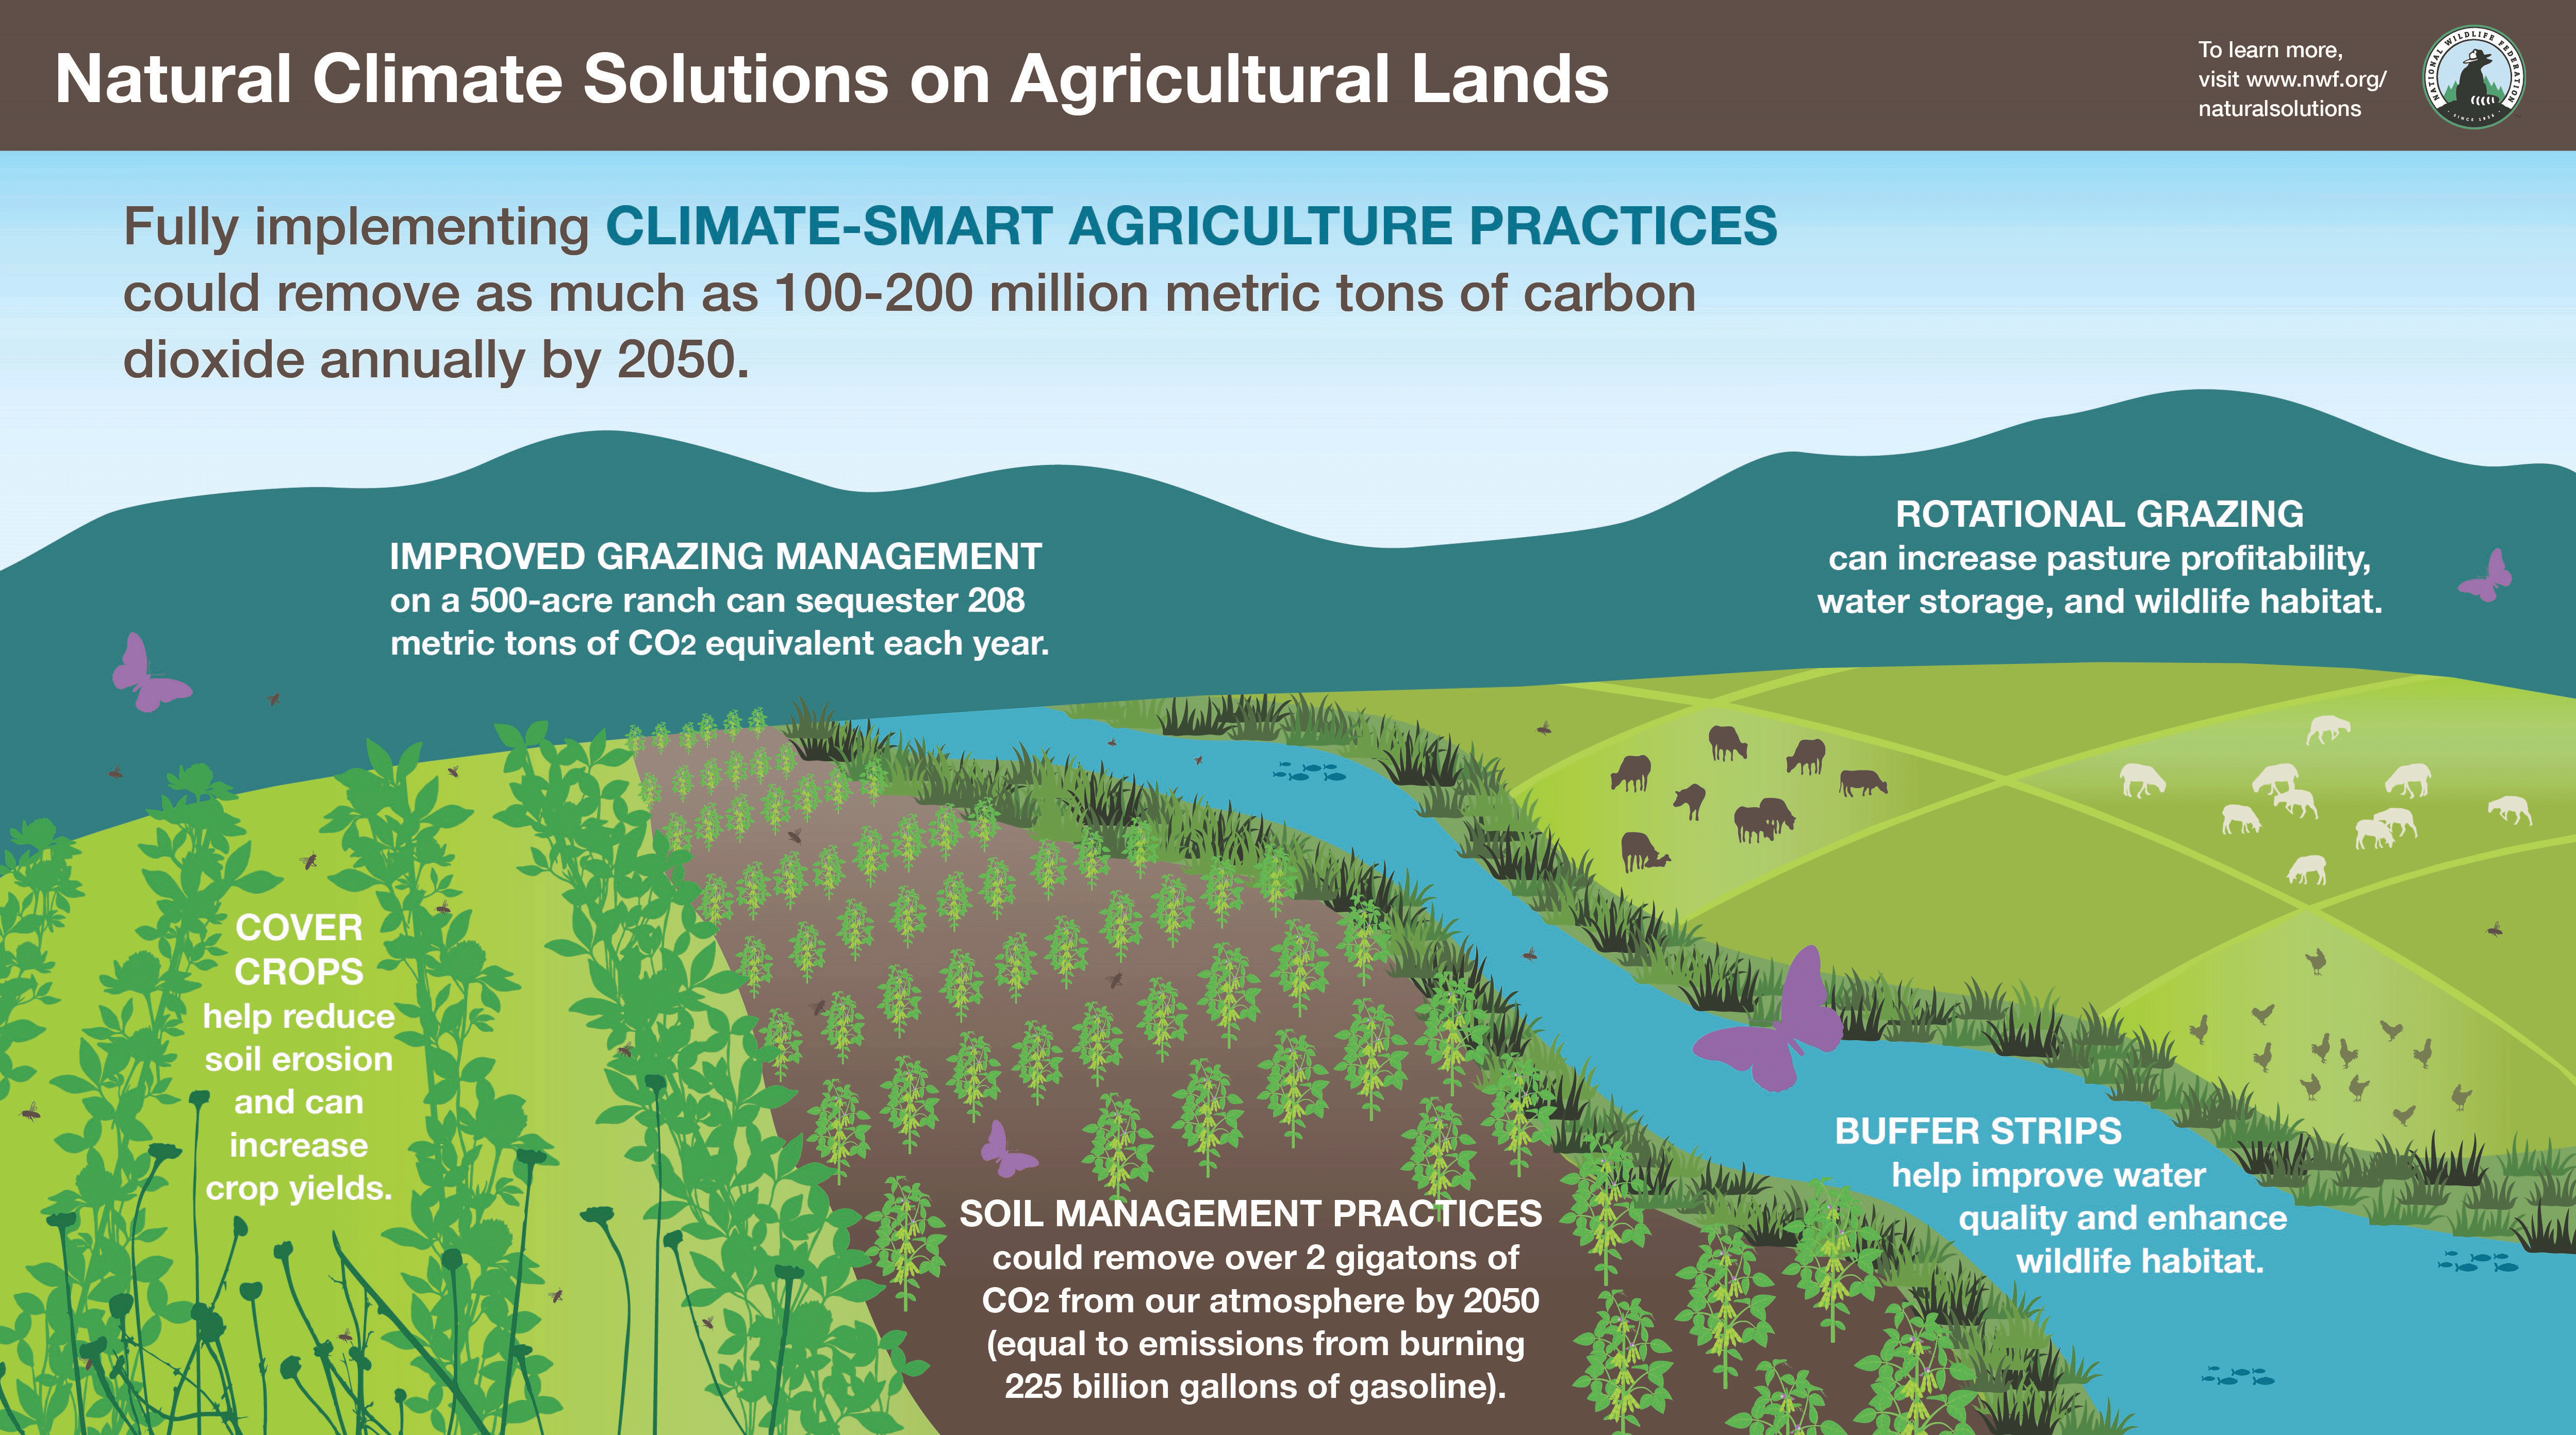 Natural Climate Solutions on Agricultural Lands